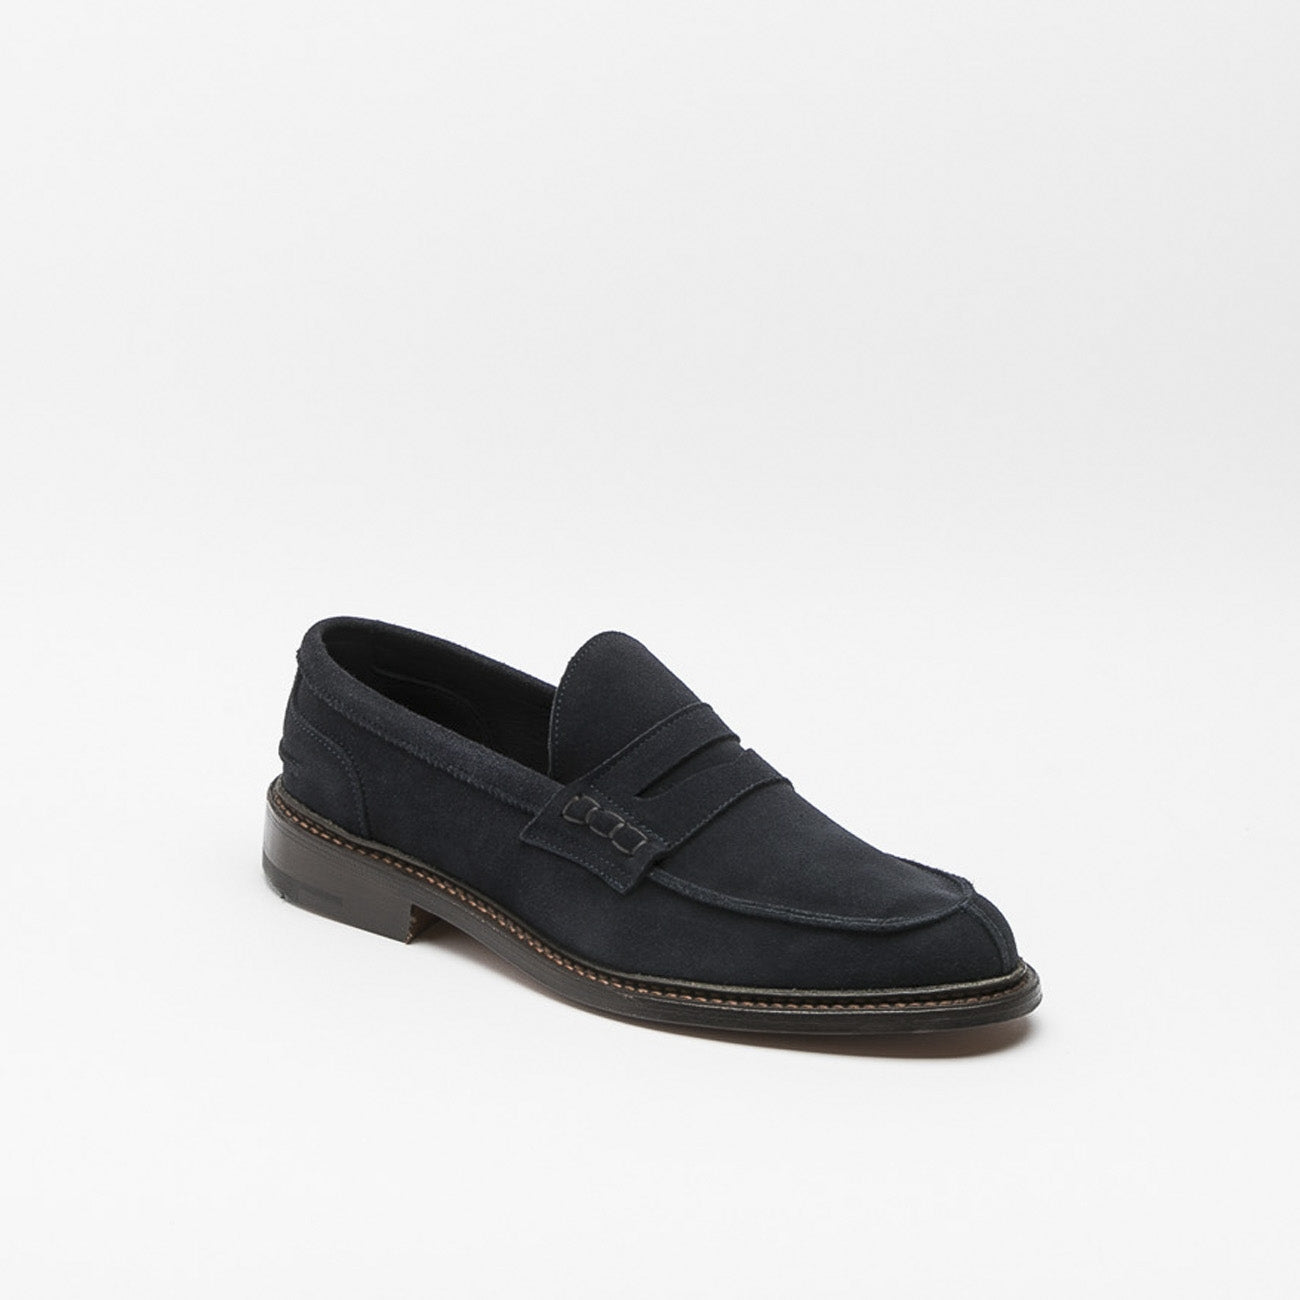 Tricker's Adam penny loafer moccasin in blue suede